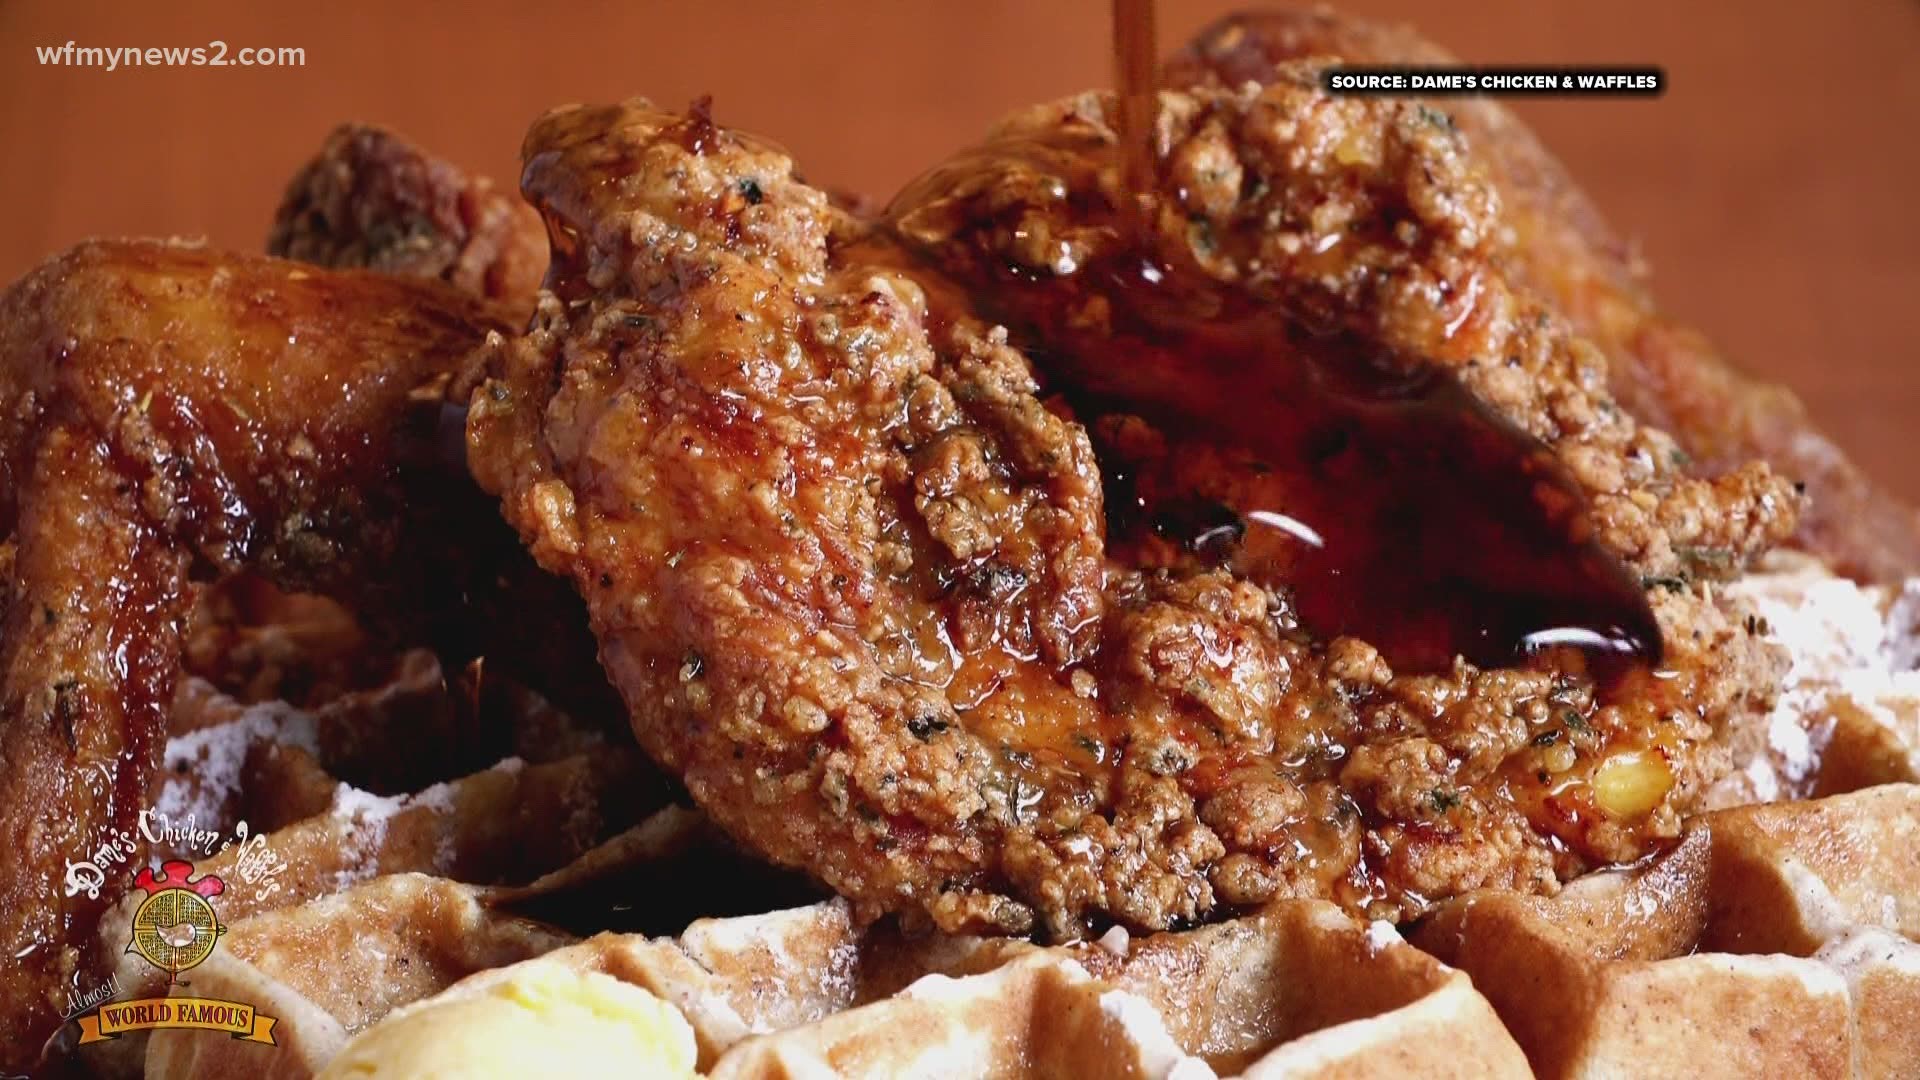 Dame's Chicken and Waffles is offering take-out and dine-in services amid COVID-19 pandemic.